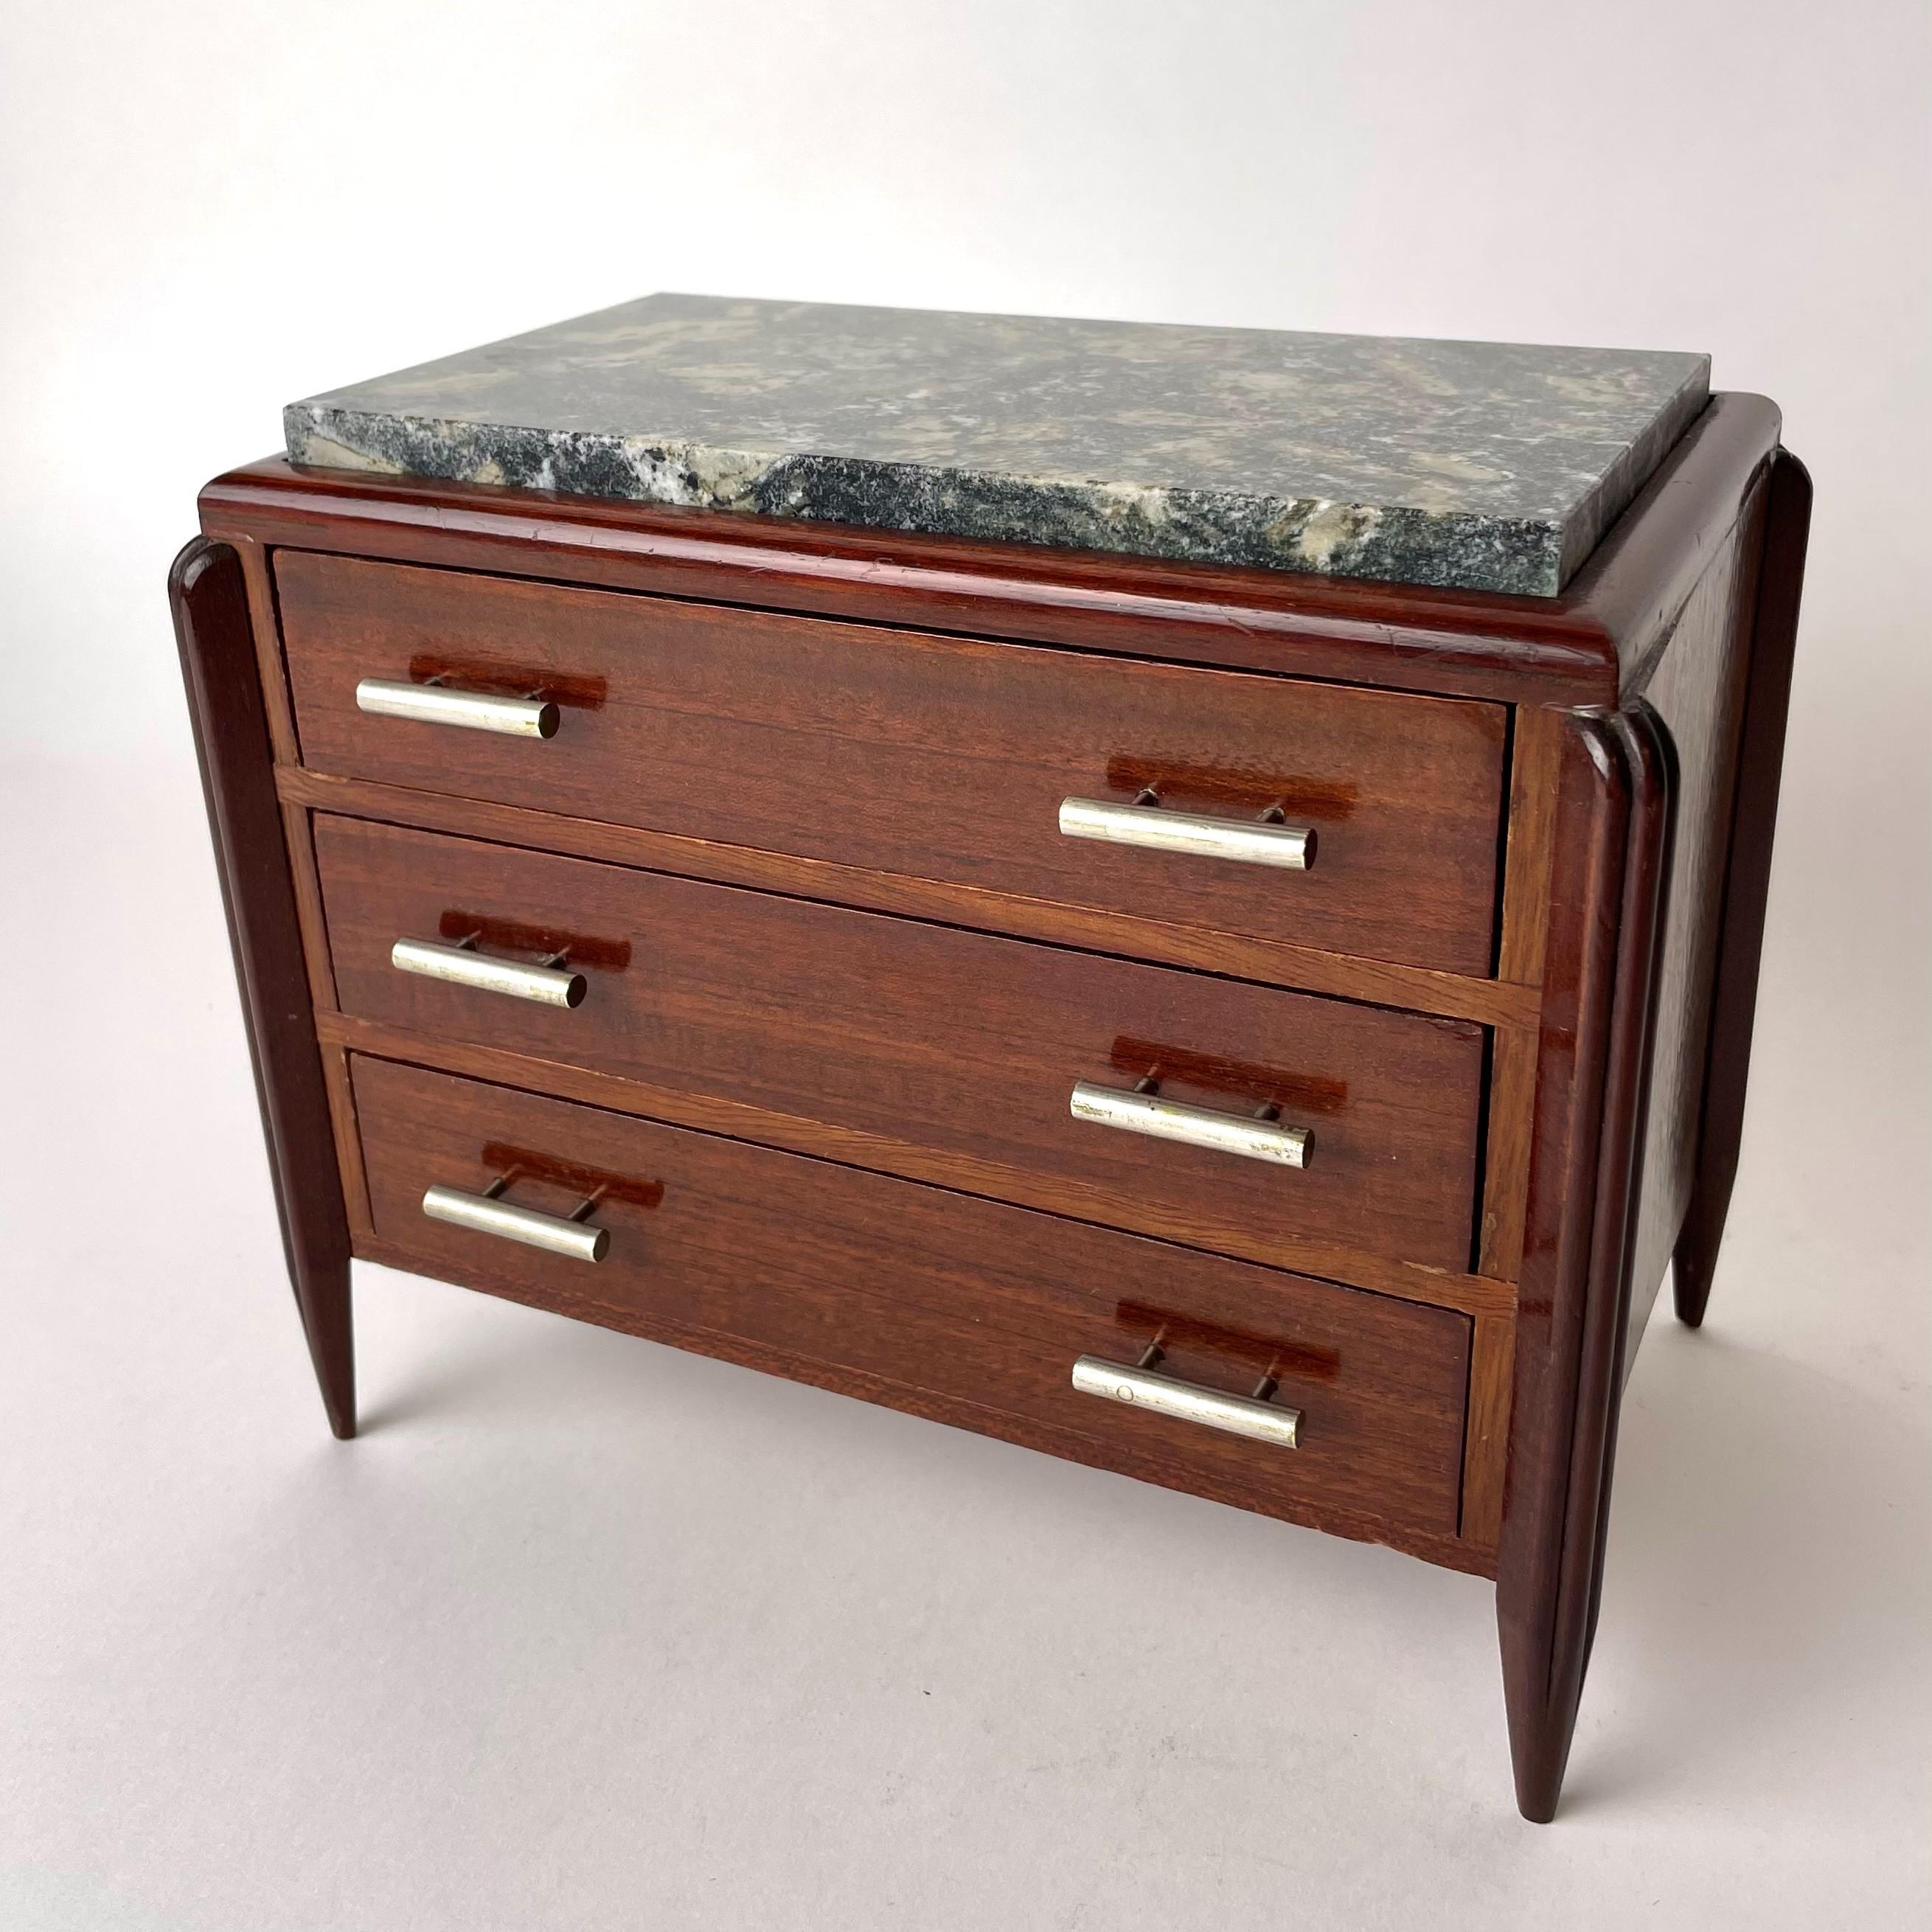 Very elegant 1920s Art Deco jewelery box in the style of Jacques-Émile Ruhlmann (1879-1933) (Not signed).
This miniature chest of drawers is made in mahogany (Swietenia mahagoni) with a marble top and chrome handles. The three drawers are lined with